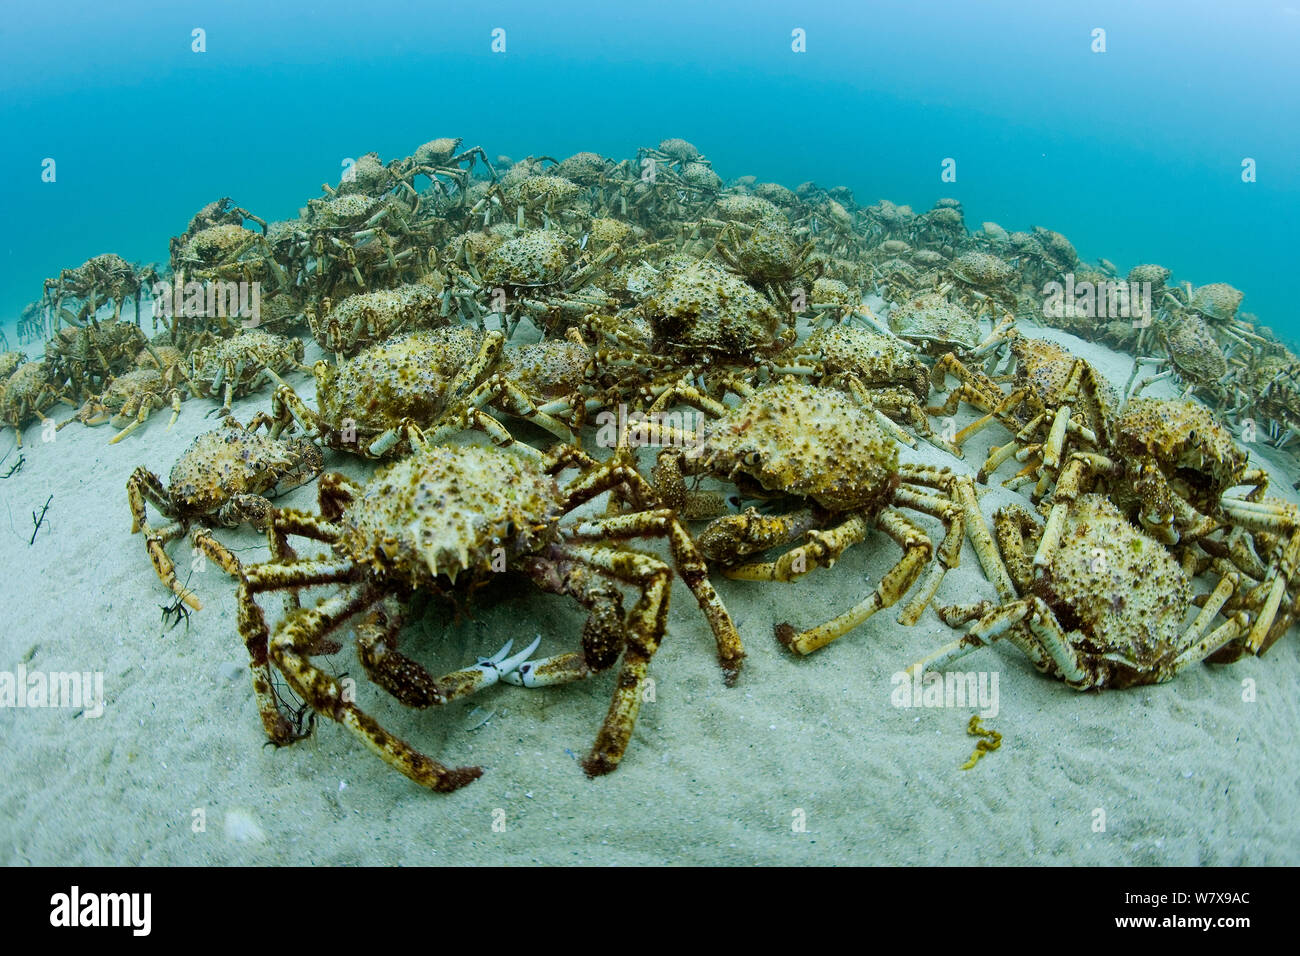 Aggregation of thousands of Spider crabs (Leptomithrax gaimardii) for moulting, South Australia Basin, Australia. Pacific Ocean. Stock Photo